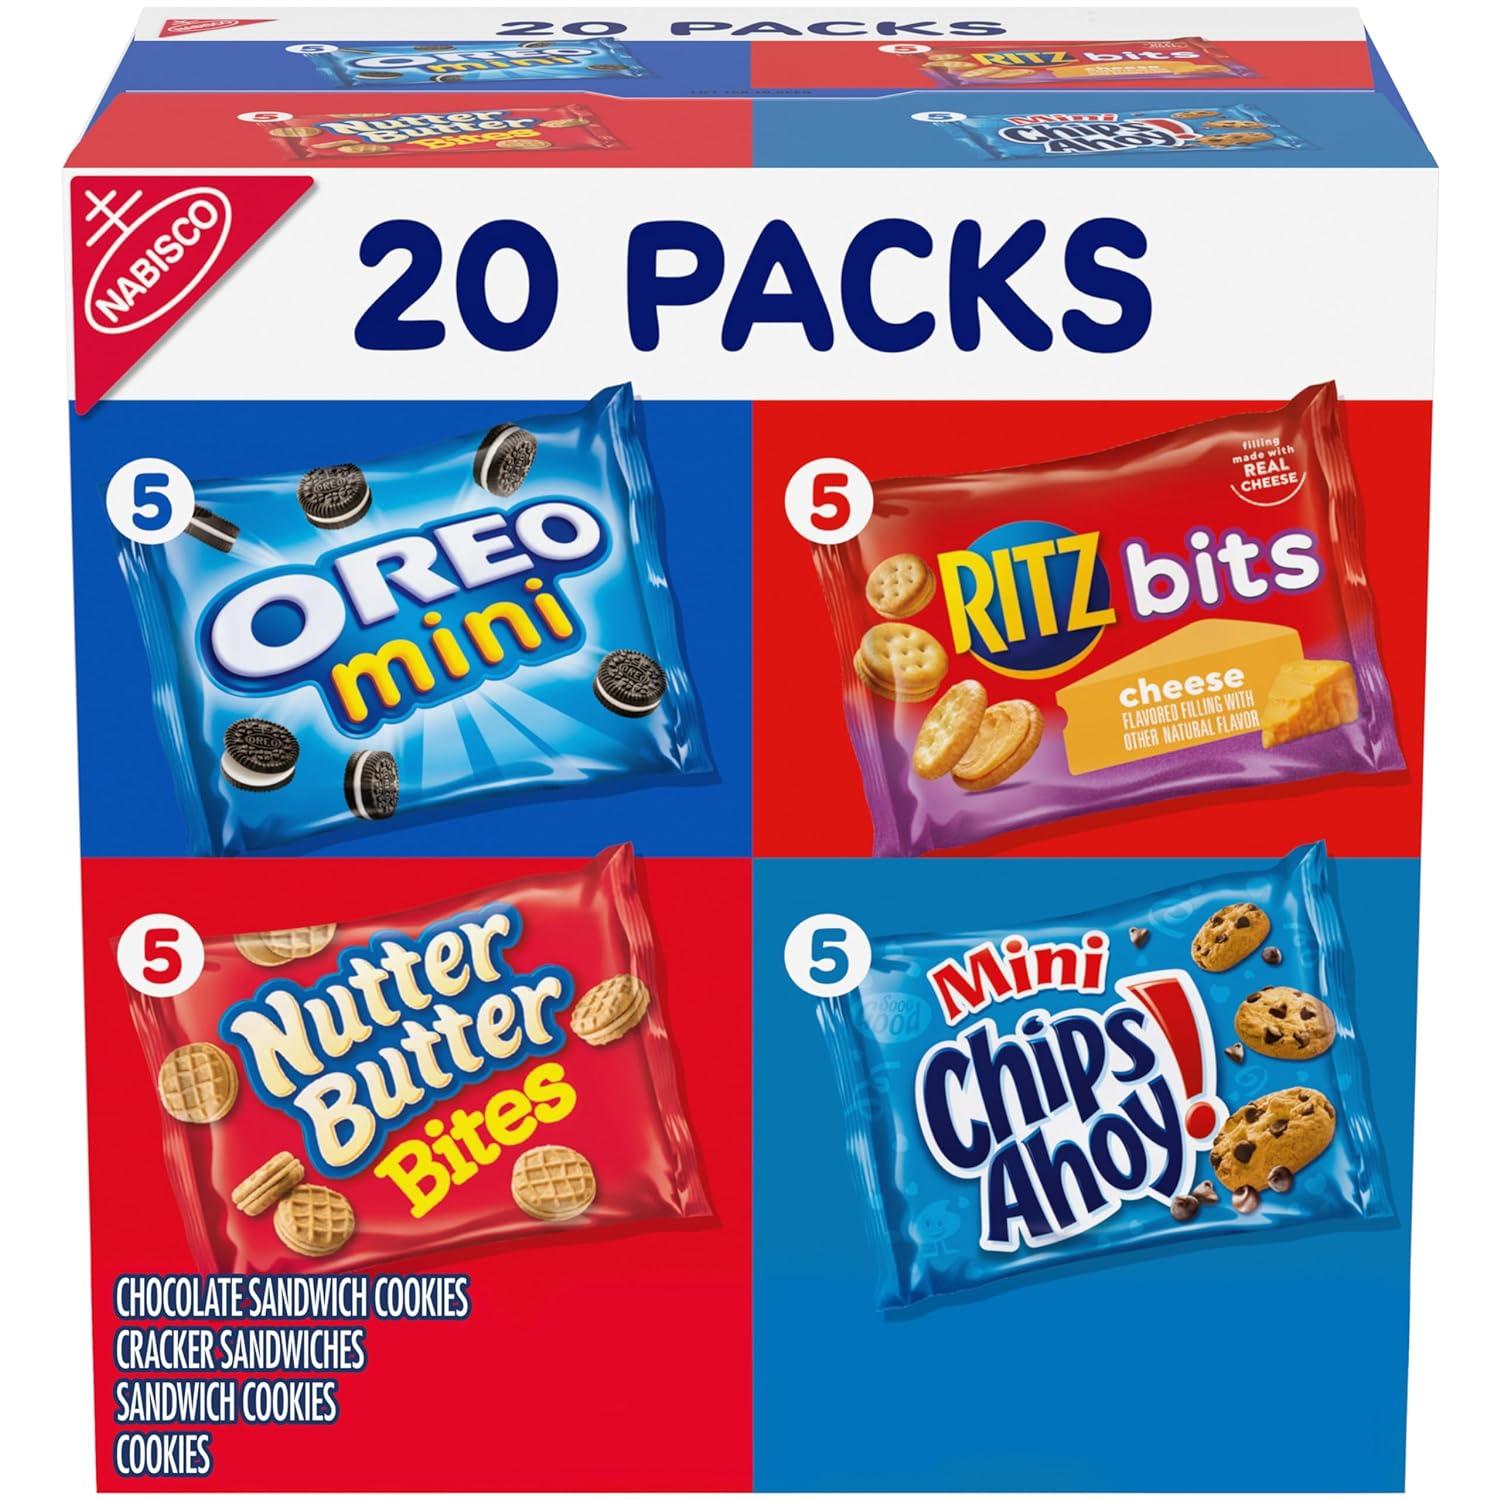 Nabisco Oreo Chips Ahoy Nutter Butter Ritz Mix Variety Pack for $6.17